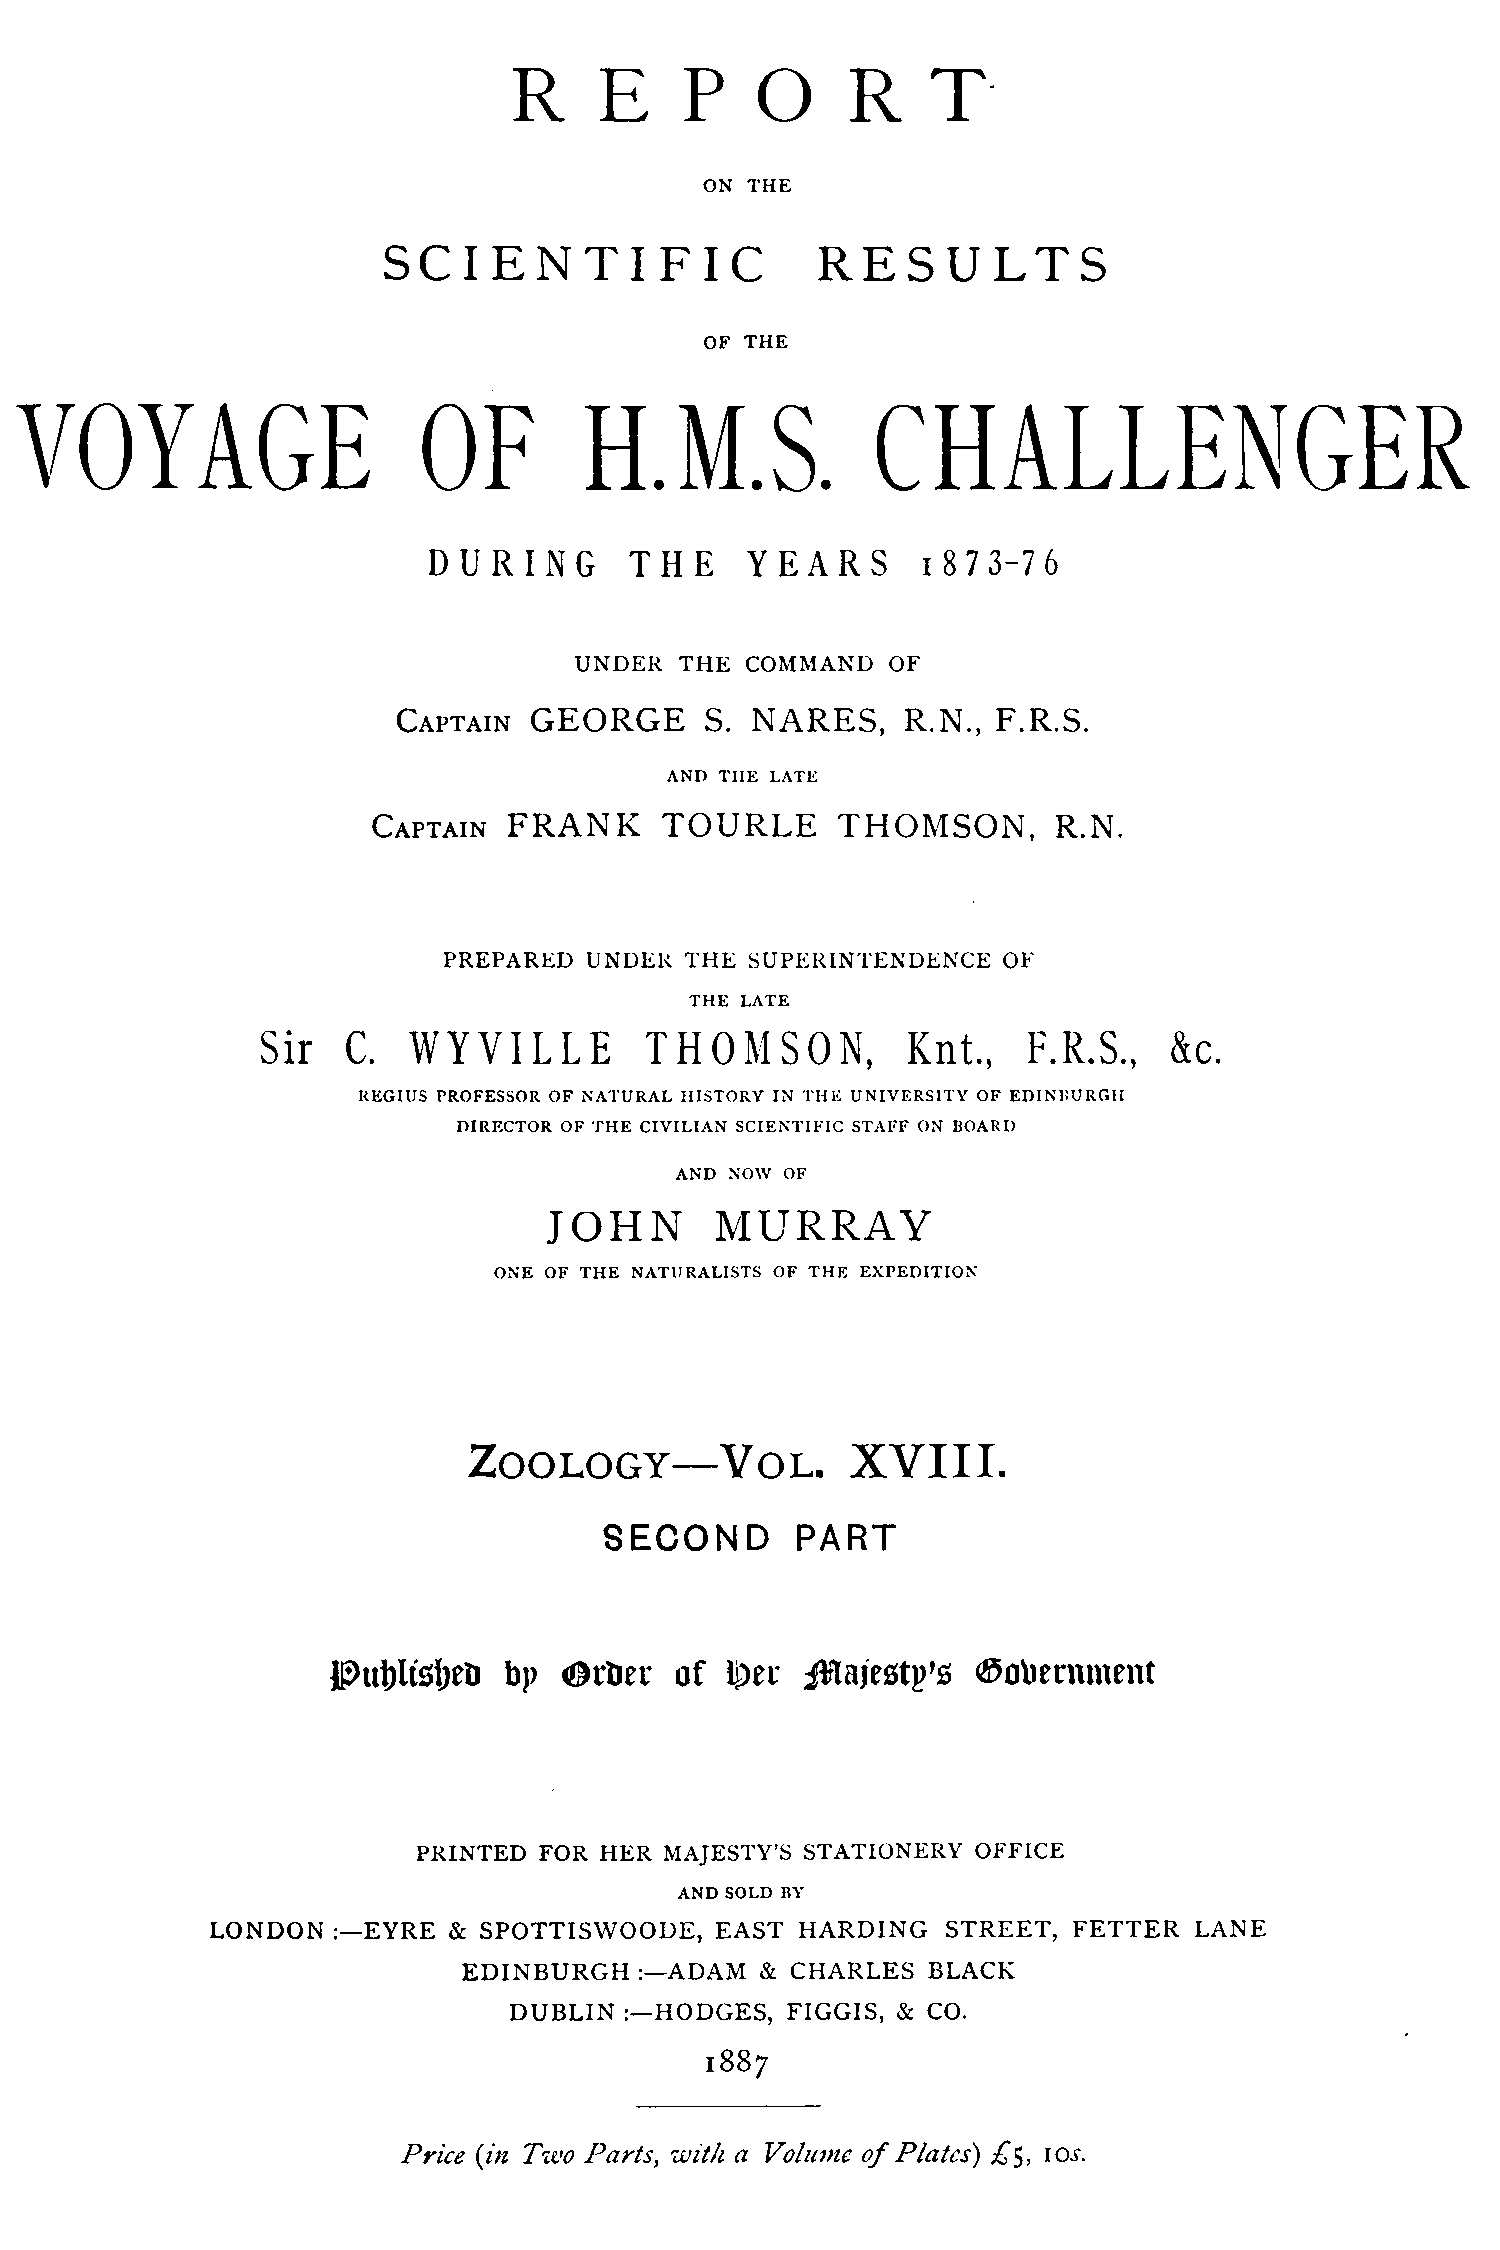 Report on the Radiolaria Collected by H.M.S. Challenger During the Years 1873-1876, Second Part: Subclass Osculosa; Index&#10;Report on the Scientific Results of the Voyage of H.M.S. Challenger During the Years 1873-76, Vol. XVIII